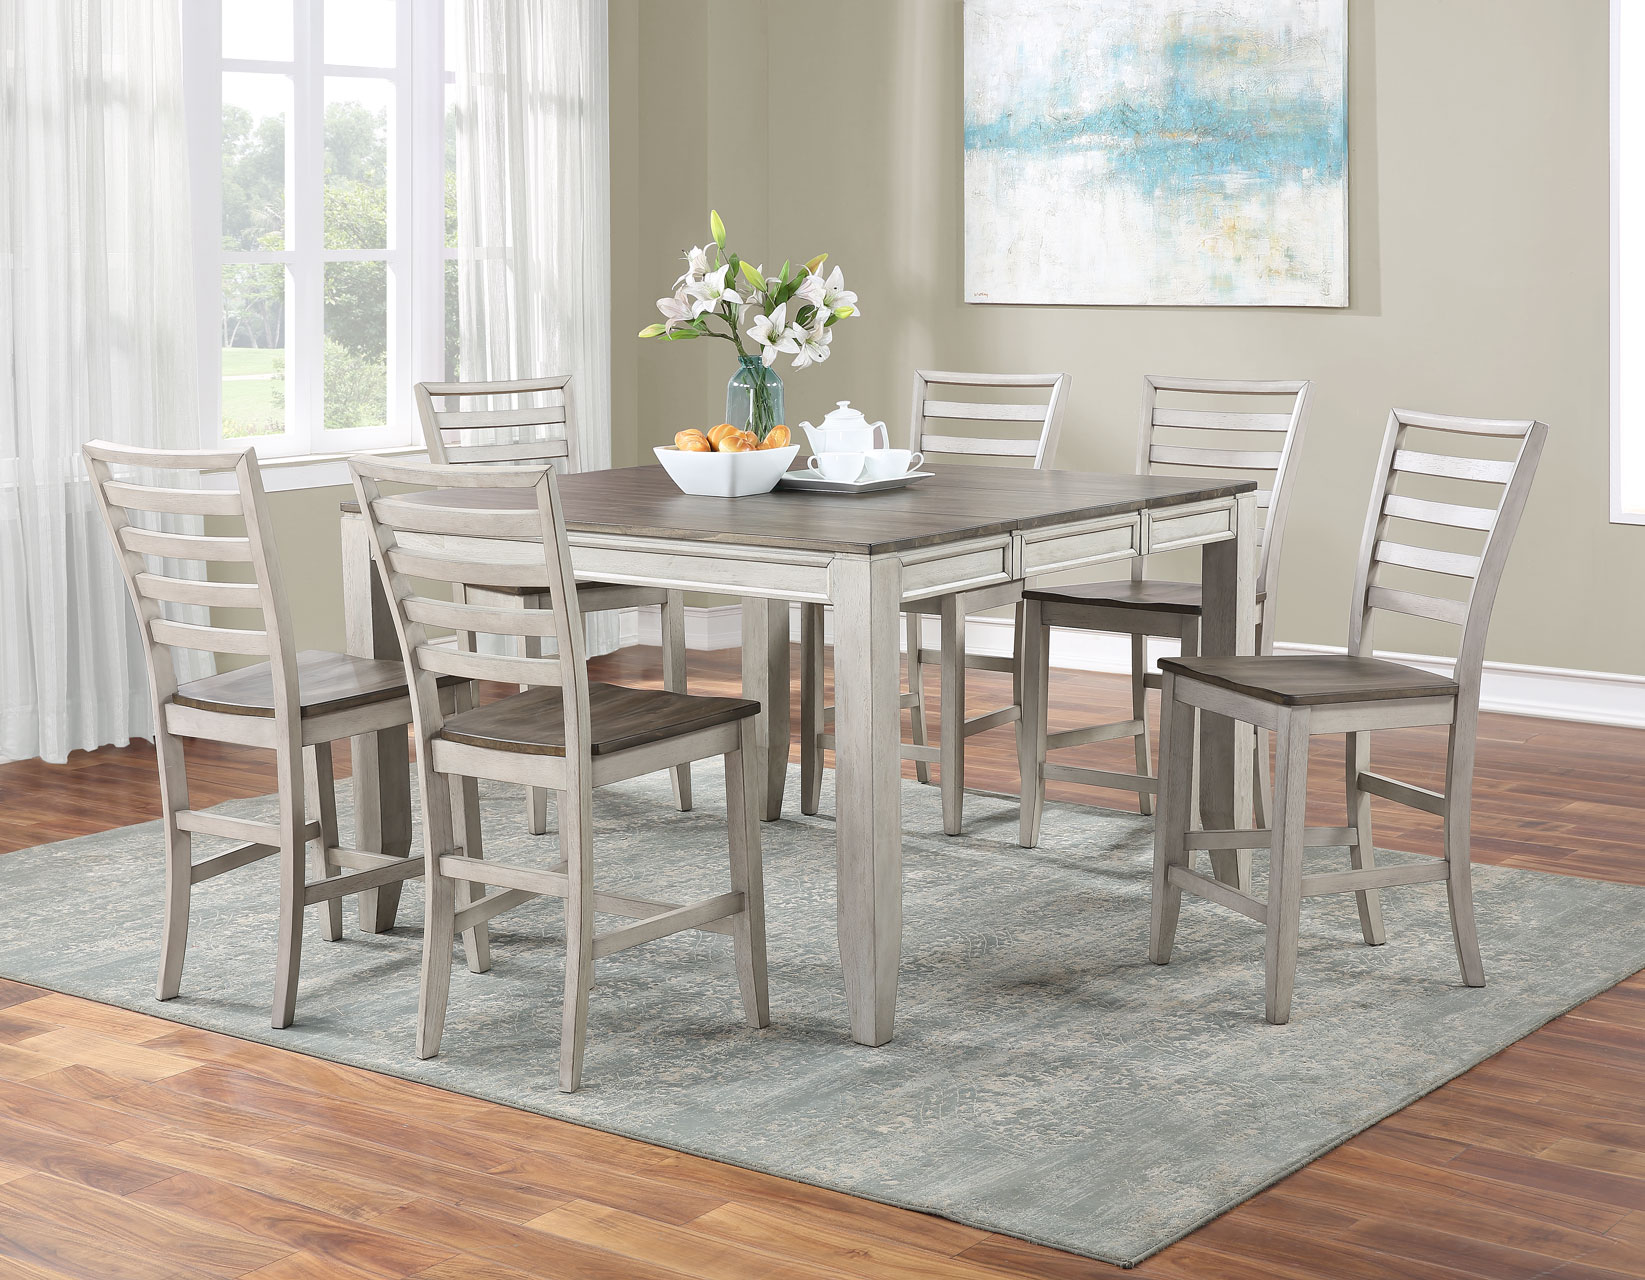 Abacus 5 Piece Counter Dining Set, Dining Room Sets Under 500